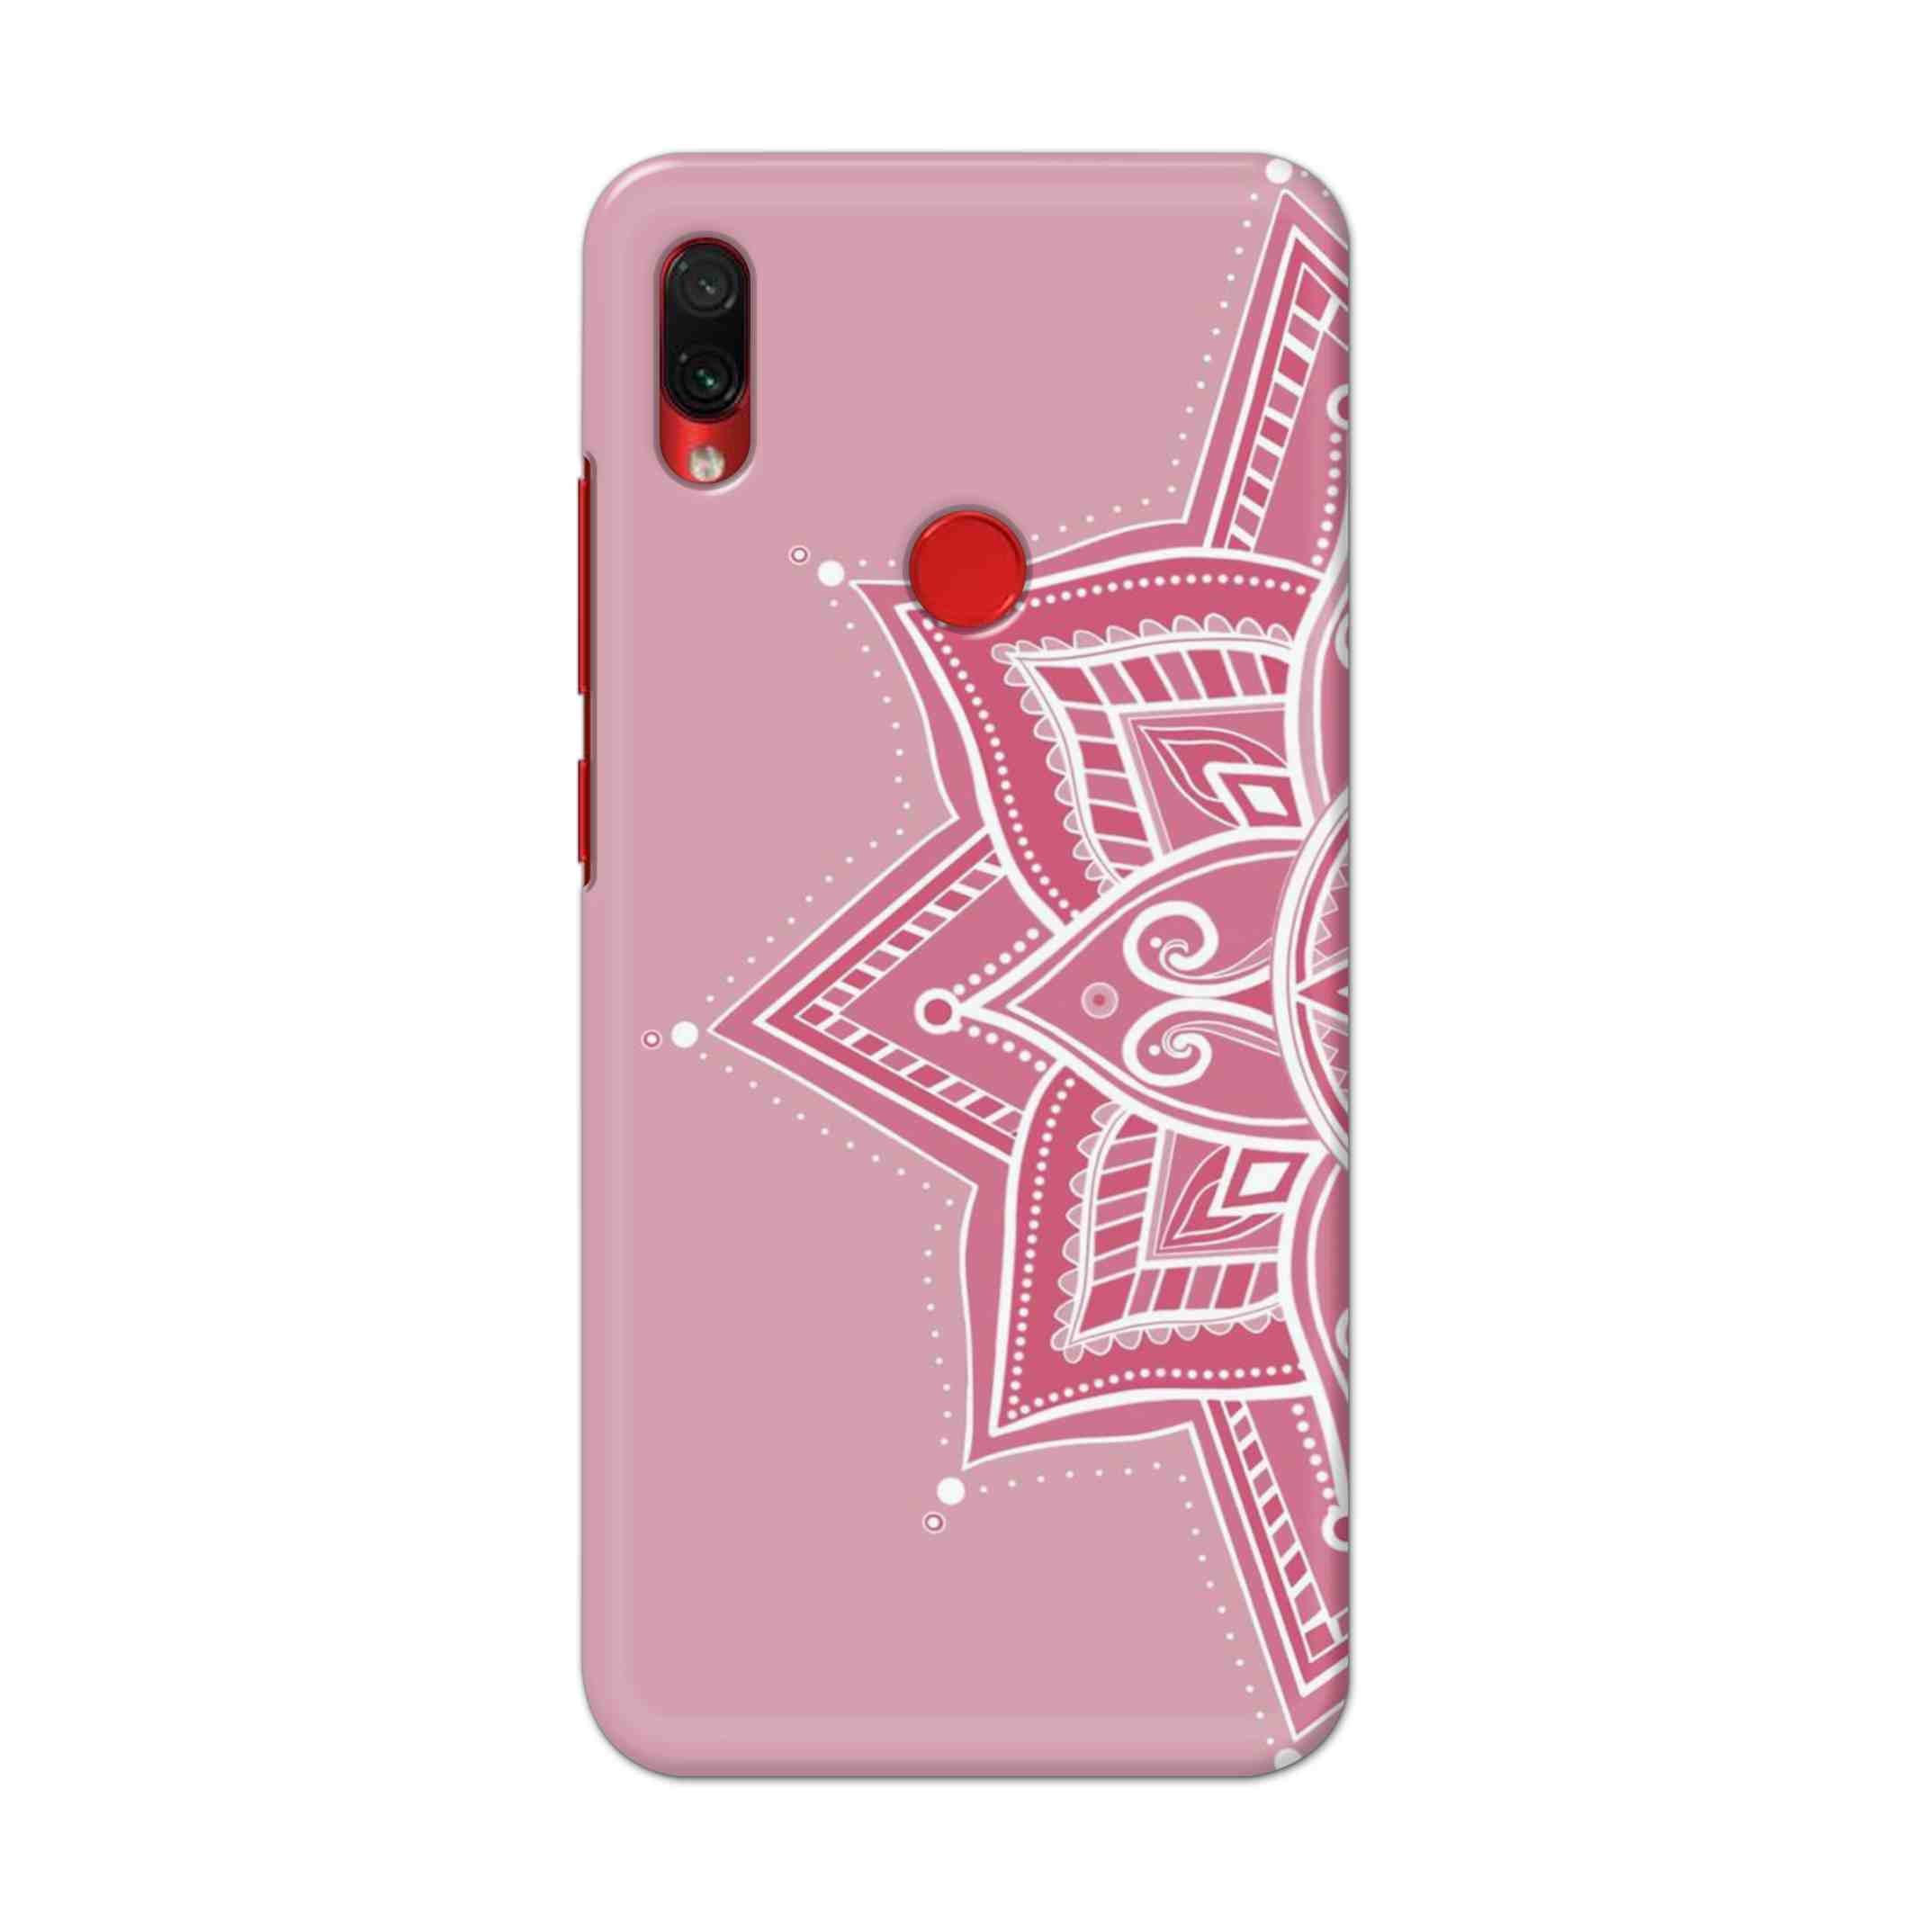 Buy Pink Rangoli Hard Back Mobile Phone Case Cover For Xiaomi Redmi Note 7S Online